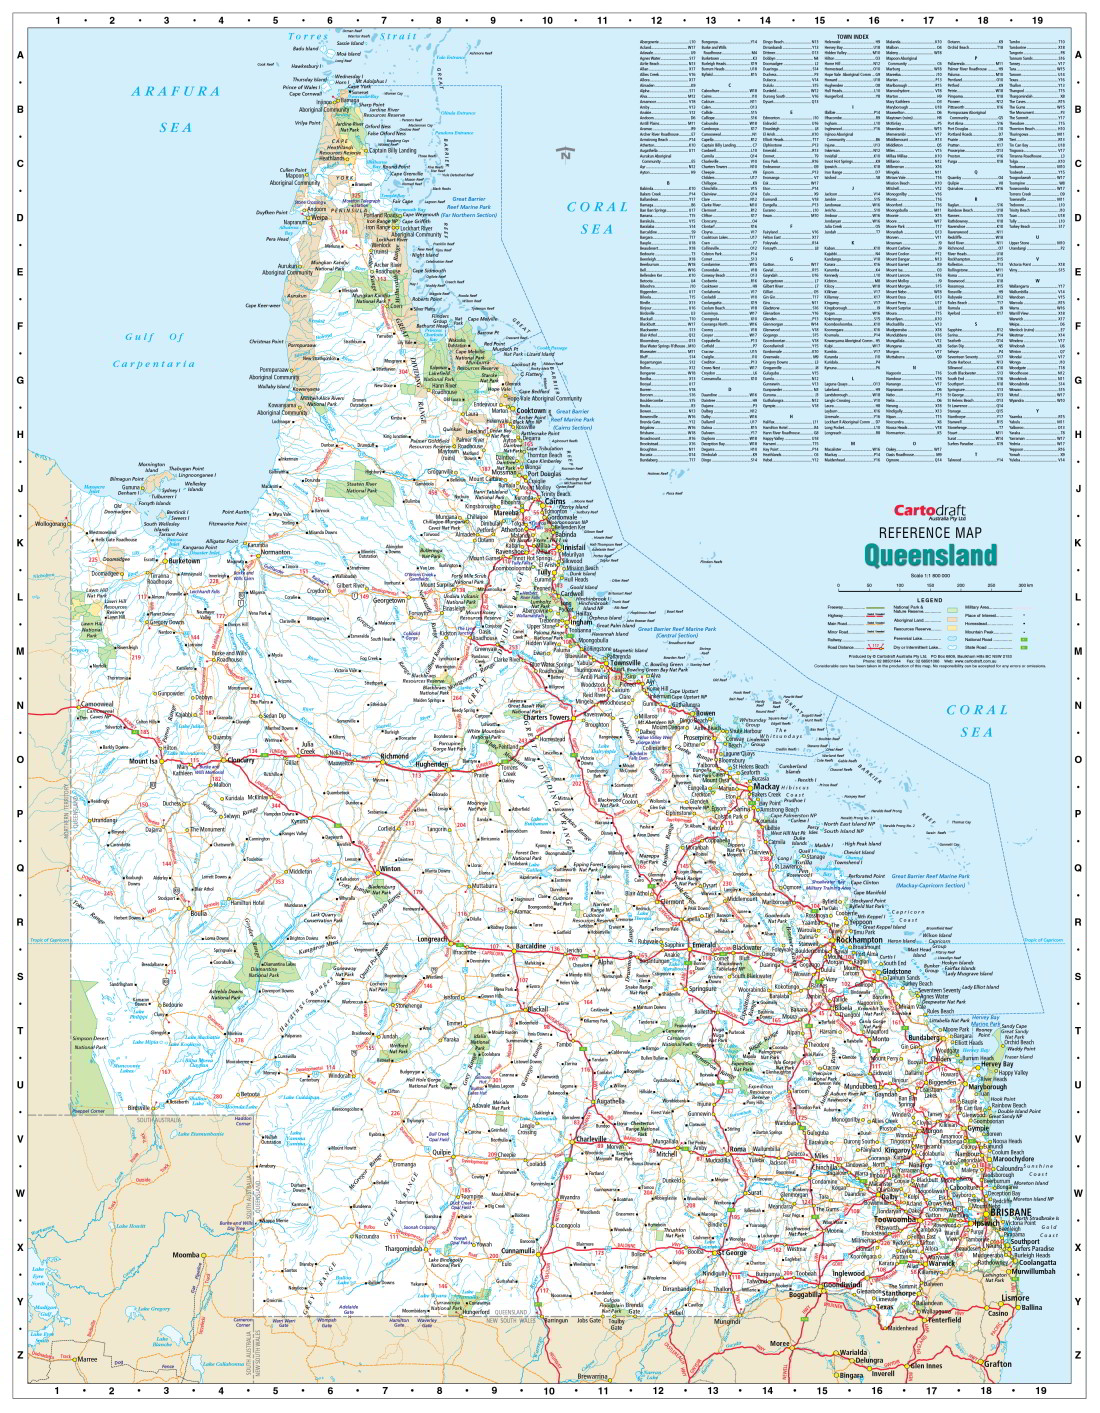 Qld Reference Map | Cartodraft's Queensland state map